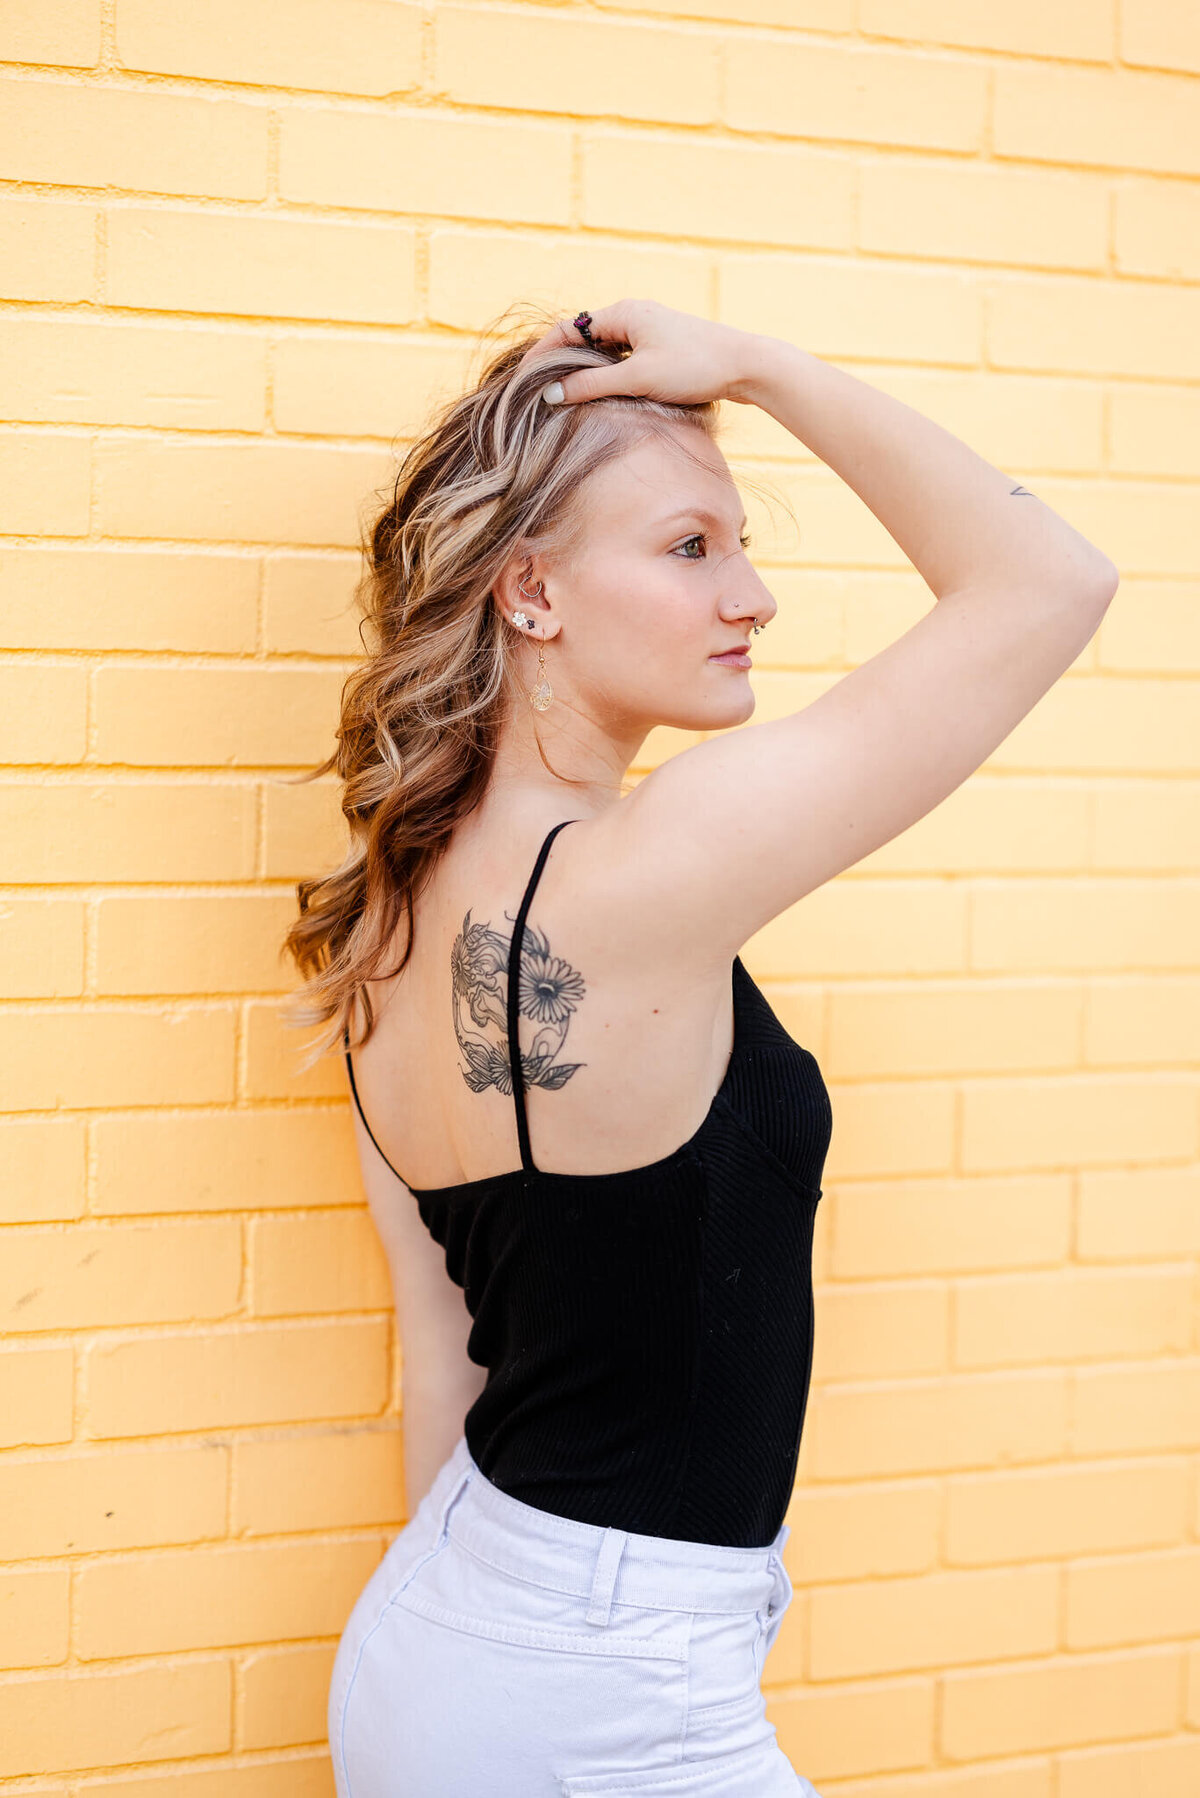 A high school senior wearing a black top and white denim skirt stands in front of a yellow brick wall. She has her hand  in her hair and is facing away to show off the tattoo on her shoulder.